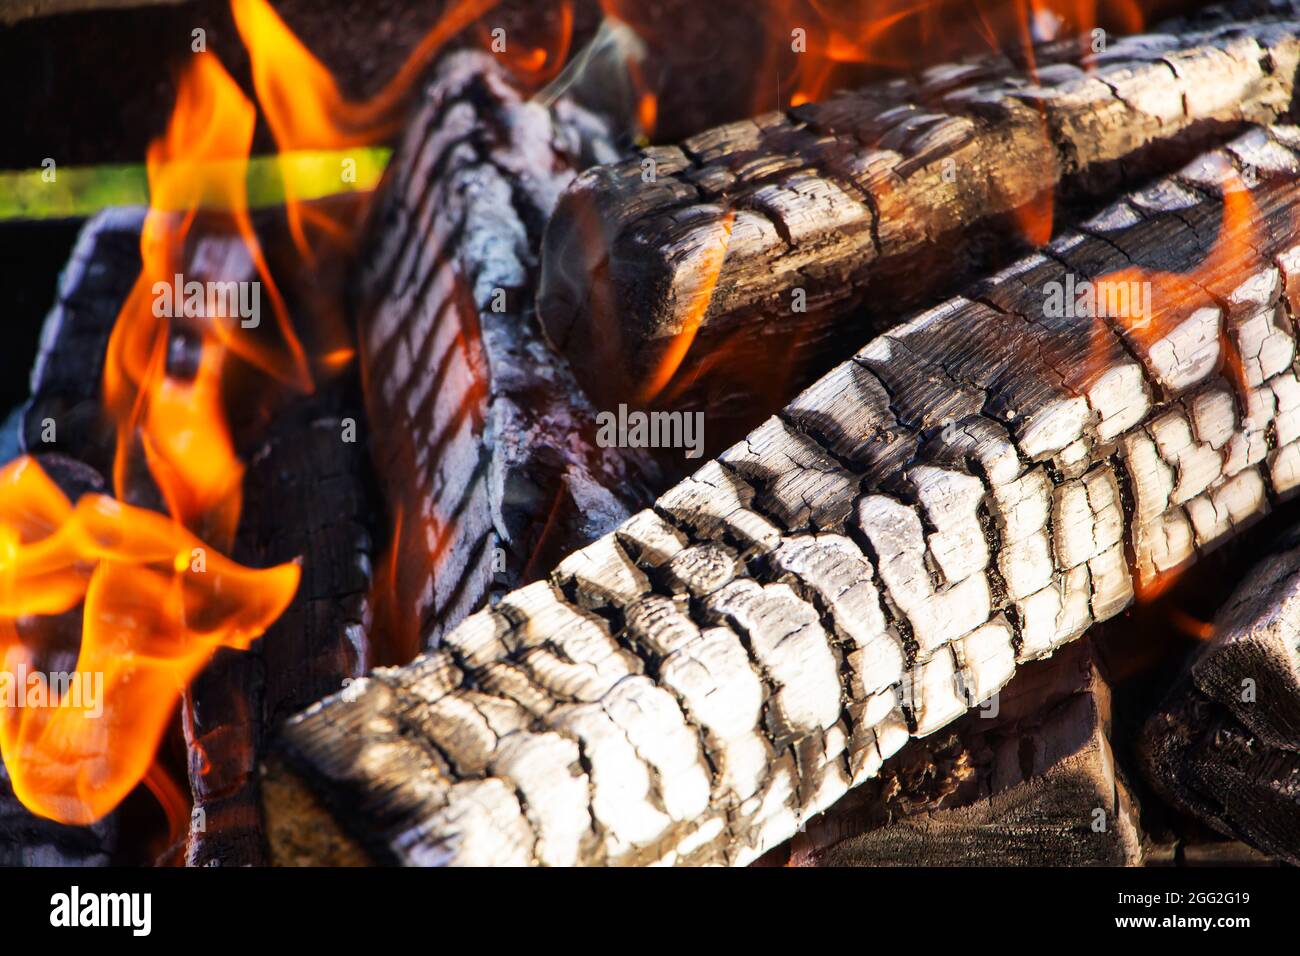 Charcoal Fire Wood Burning Wood And Coal In Fireplace Stock Photo, Picture  and Royalty Free Image. Image 80559009.